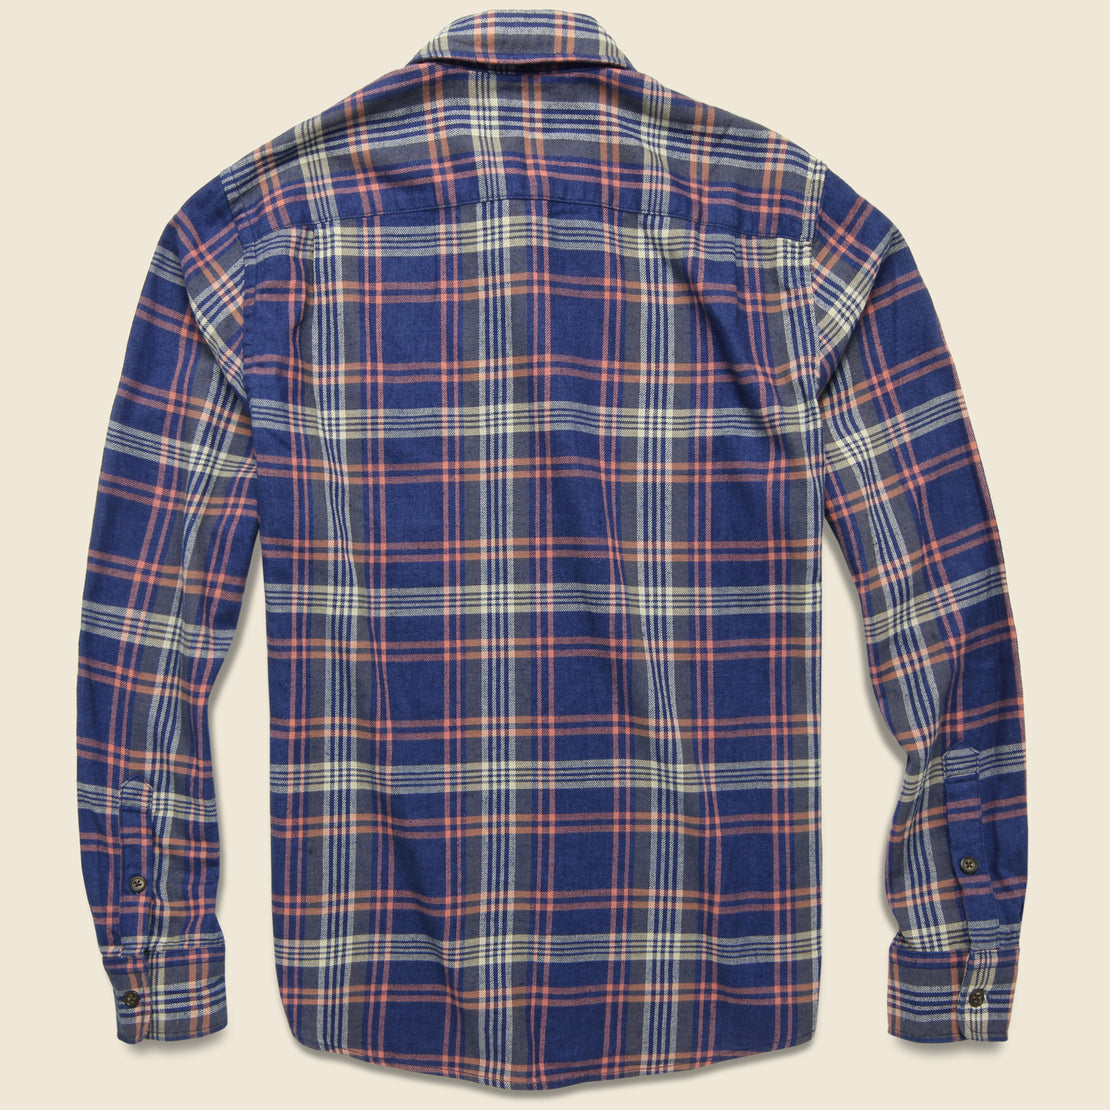 Stretch Seaview Flannel - Cardiff Plaid - Faherty - STAG Provisions - Tops - L/S Woven - Plaid